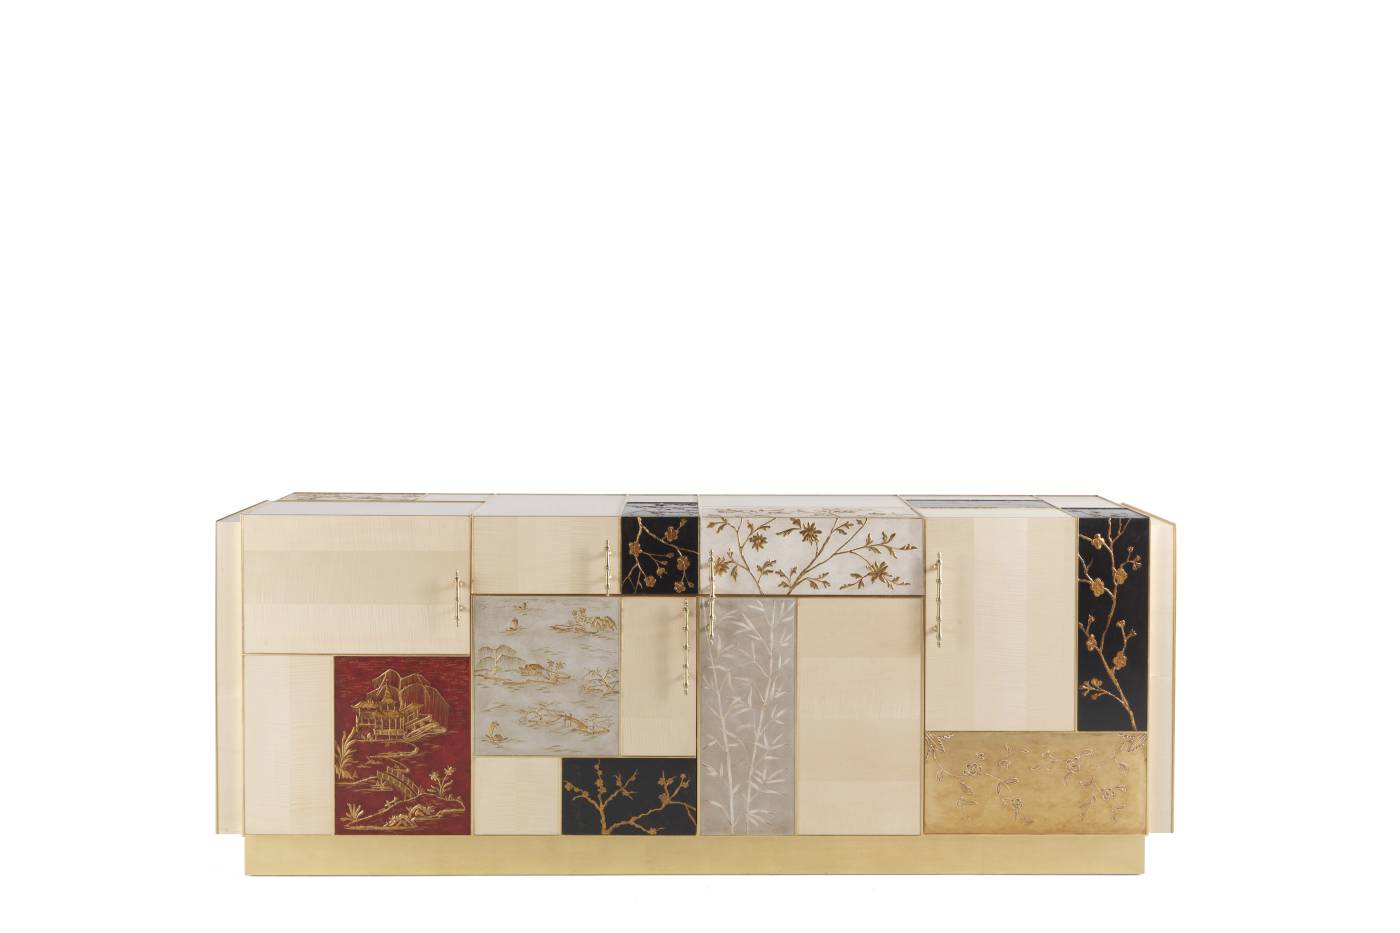 UKIYO sideboard – Transform your space with luxury Made in Italy classic day storage units of Oro Bianco collection.